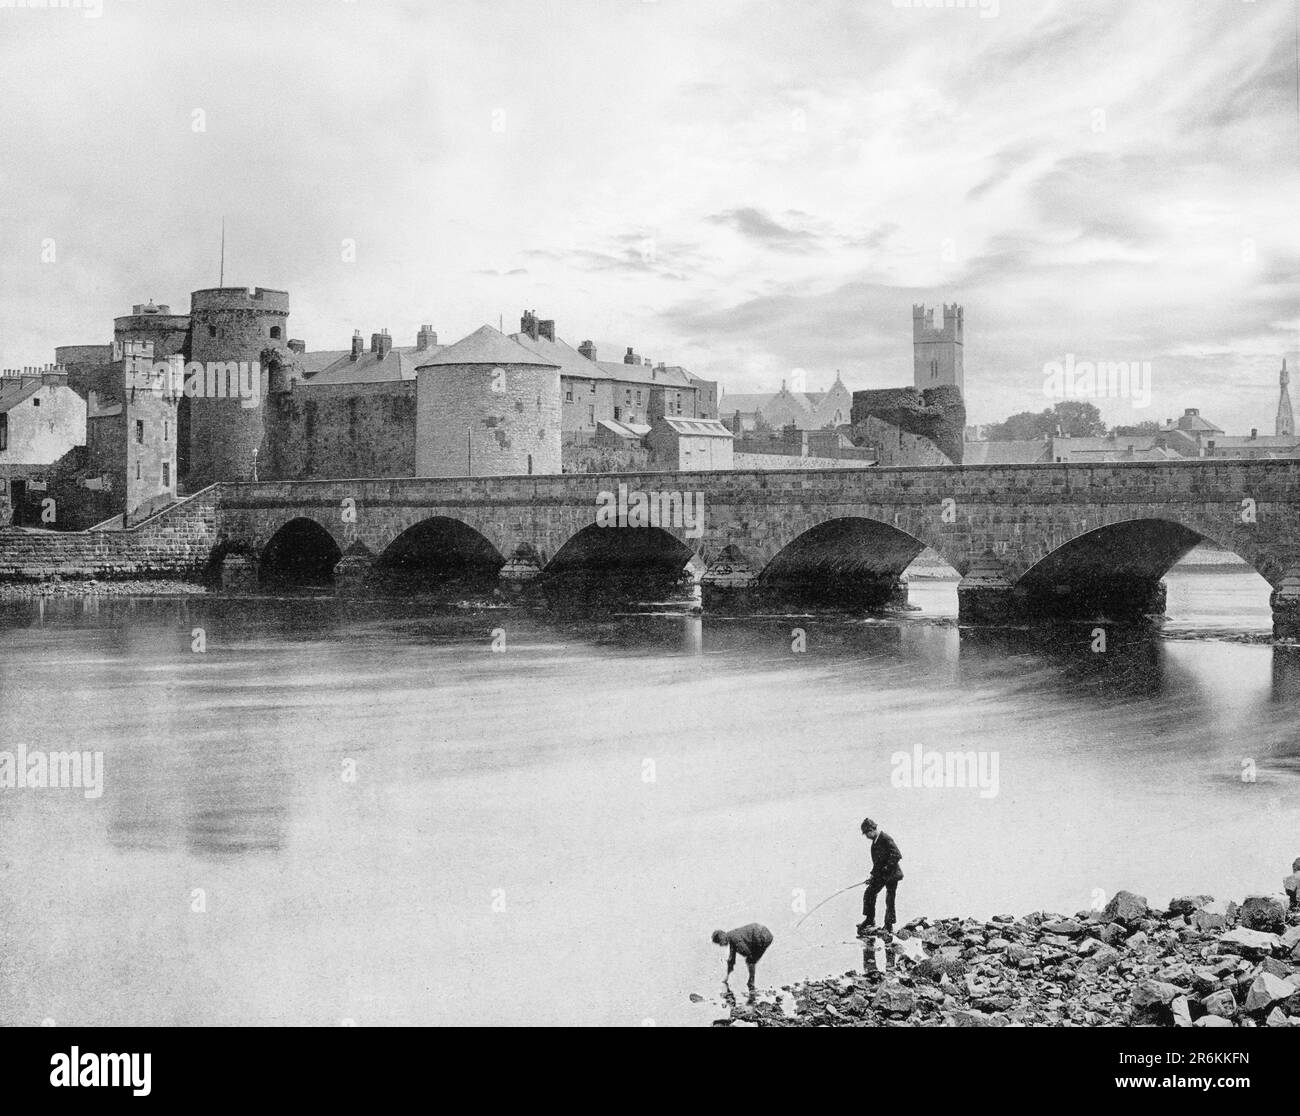 A late 19th century view of people fishing beside the  Thomond Bridge built in 1836 and beyond is 13th-century King John's Castle, aka Limerick Castle, Ireland. Although the site dates back to 922 when the Vikings lived on the Island, the castle itself was built on the orders of King John in 1200. One of the best preserved Norman castles in Europe, the walls, towers and fortifications remain today. Stock Photo